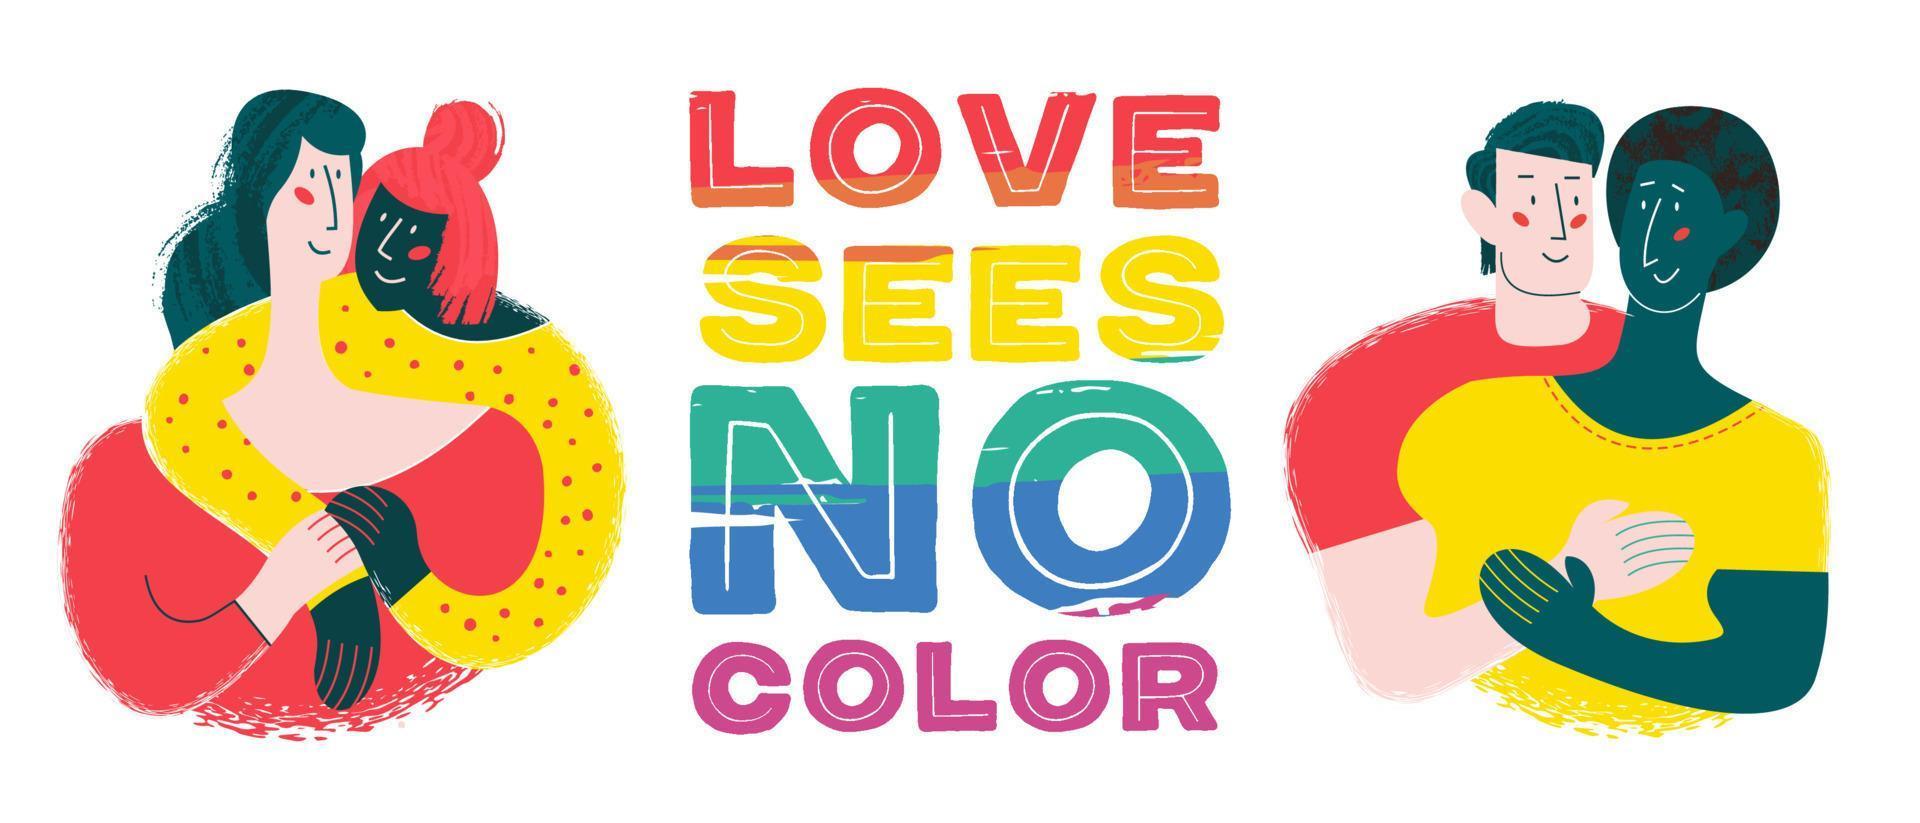 Love sees no color. Vector illustration, LGBT poster on white background.